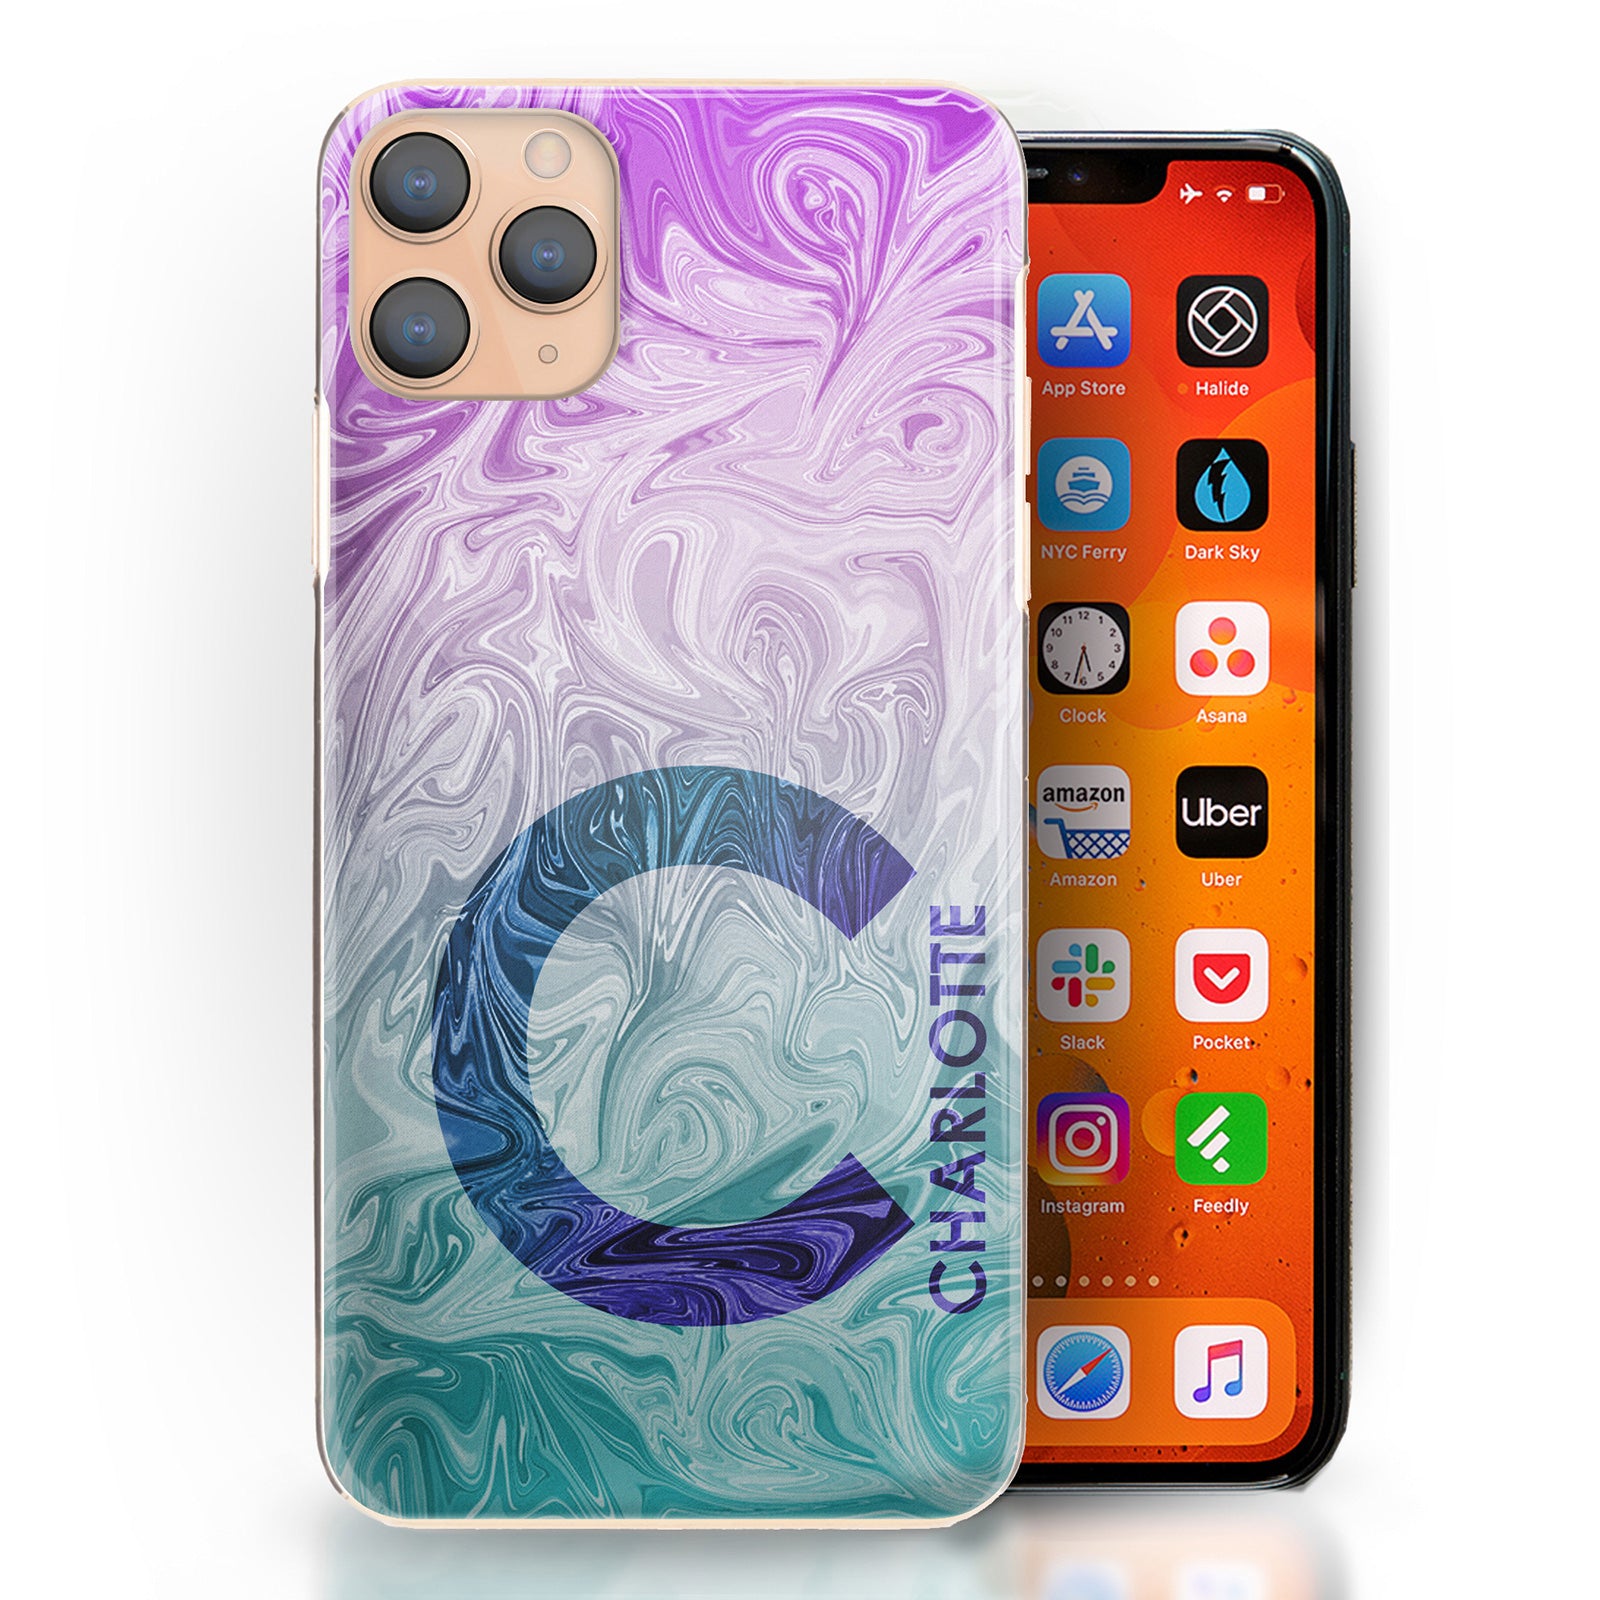 Personalised Xiaomi Phone Hard Case with Blue Turquoise Gradient Text and Initial on Purple Cyan Gradient Swirled Marble